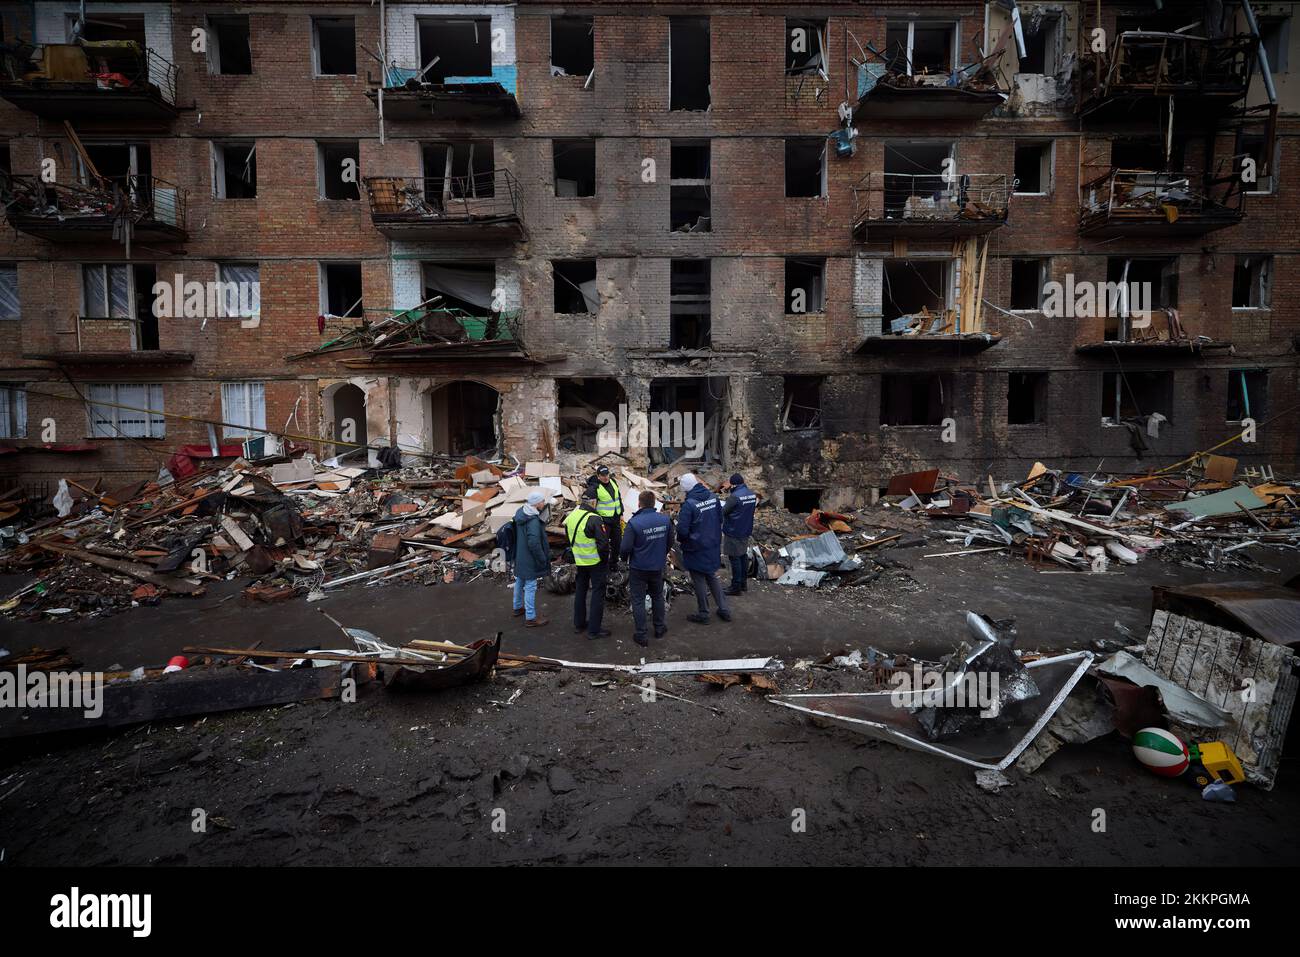 The President of Ukraine Volodymyr Zelenskyy visited the city of Vyshgorod, Kyiv region on a working trip and inspected a four-story residential building damaged by a Russian missile attack on November 23.  Head of Kyiv Regional Military Administration Oleksiy Kuleba reported to the Head of State about the scale of destruction caused by a Russian missile hitting the building. Six people have been killed and at least 30 people have been injured in this hit.  The victims are being provided with the necessary medical care. Stock Photo